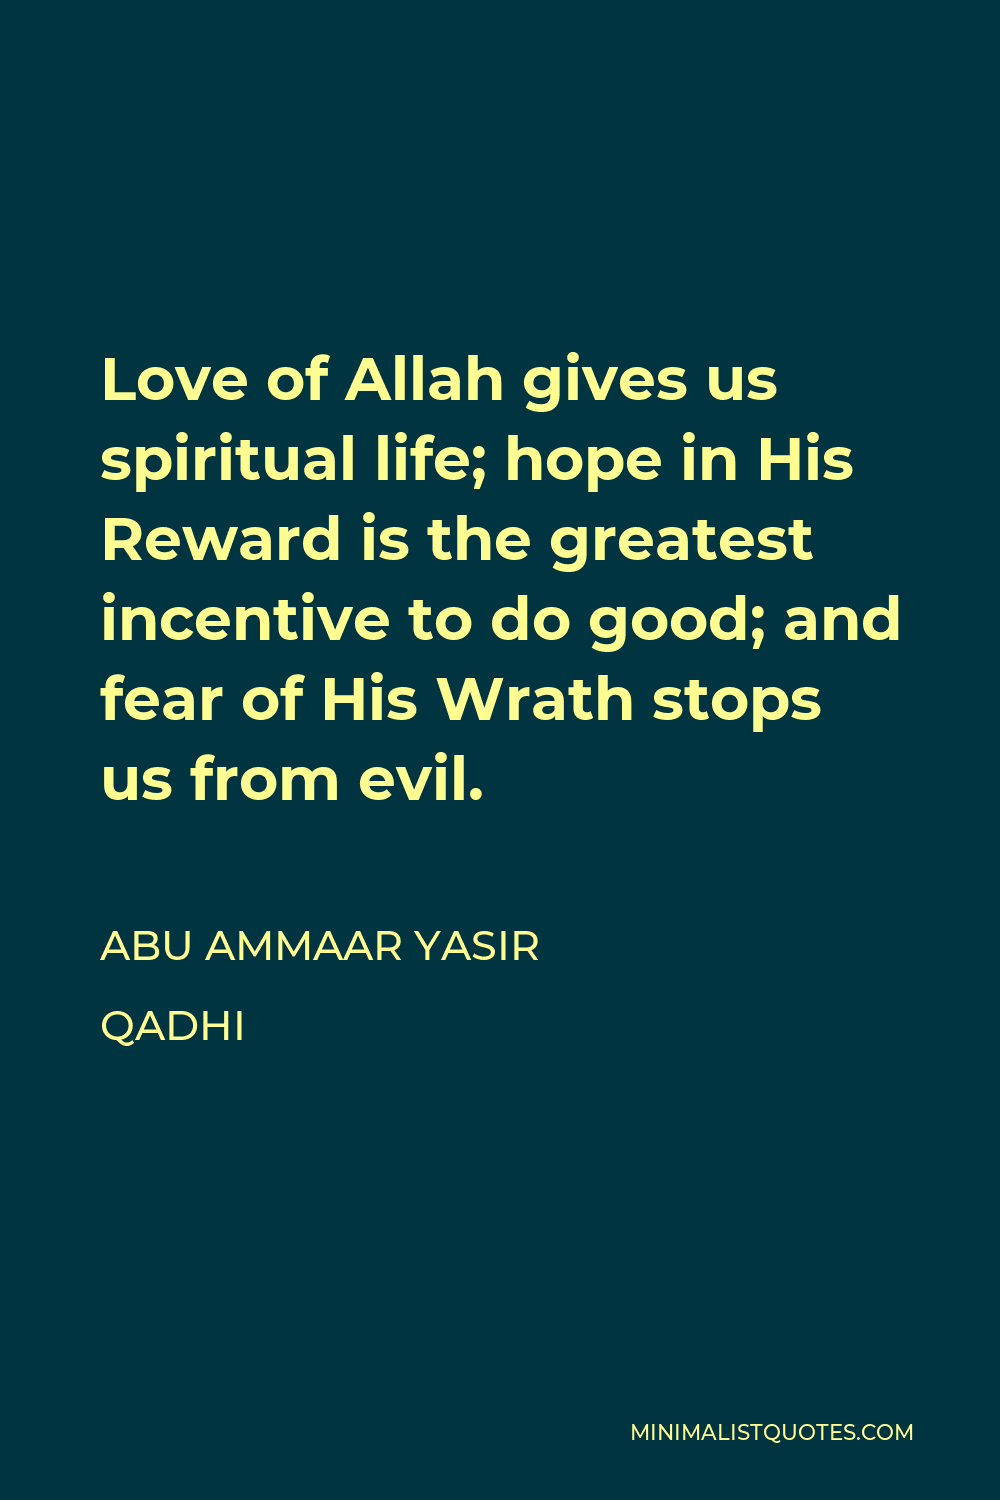 Abu Ammaar Yasir Qadhi Quote - Love of Allah gives us spiritual life; hope in His Reward is the greatest incentive to do good; and fear of His Wrath stops us from evil.